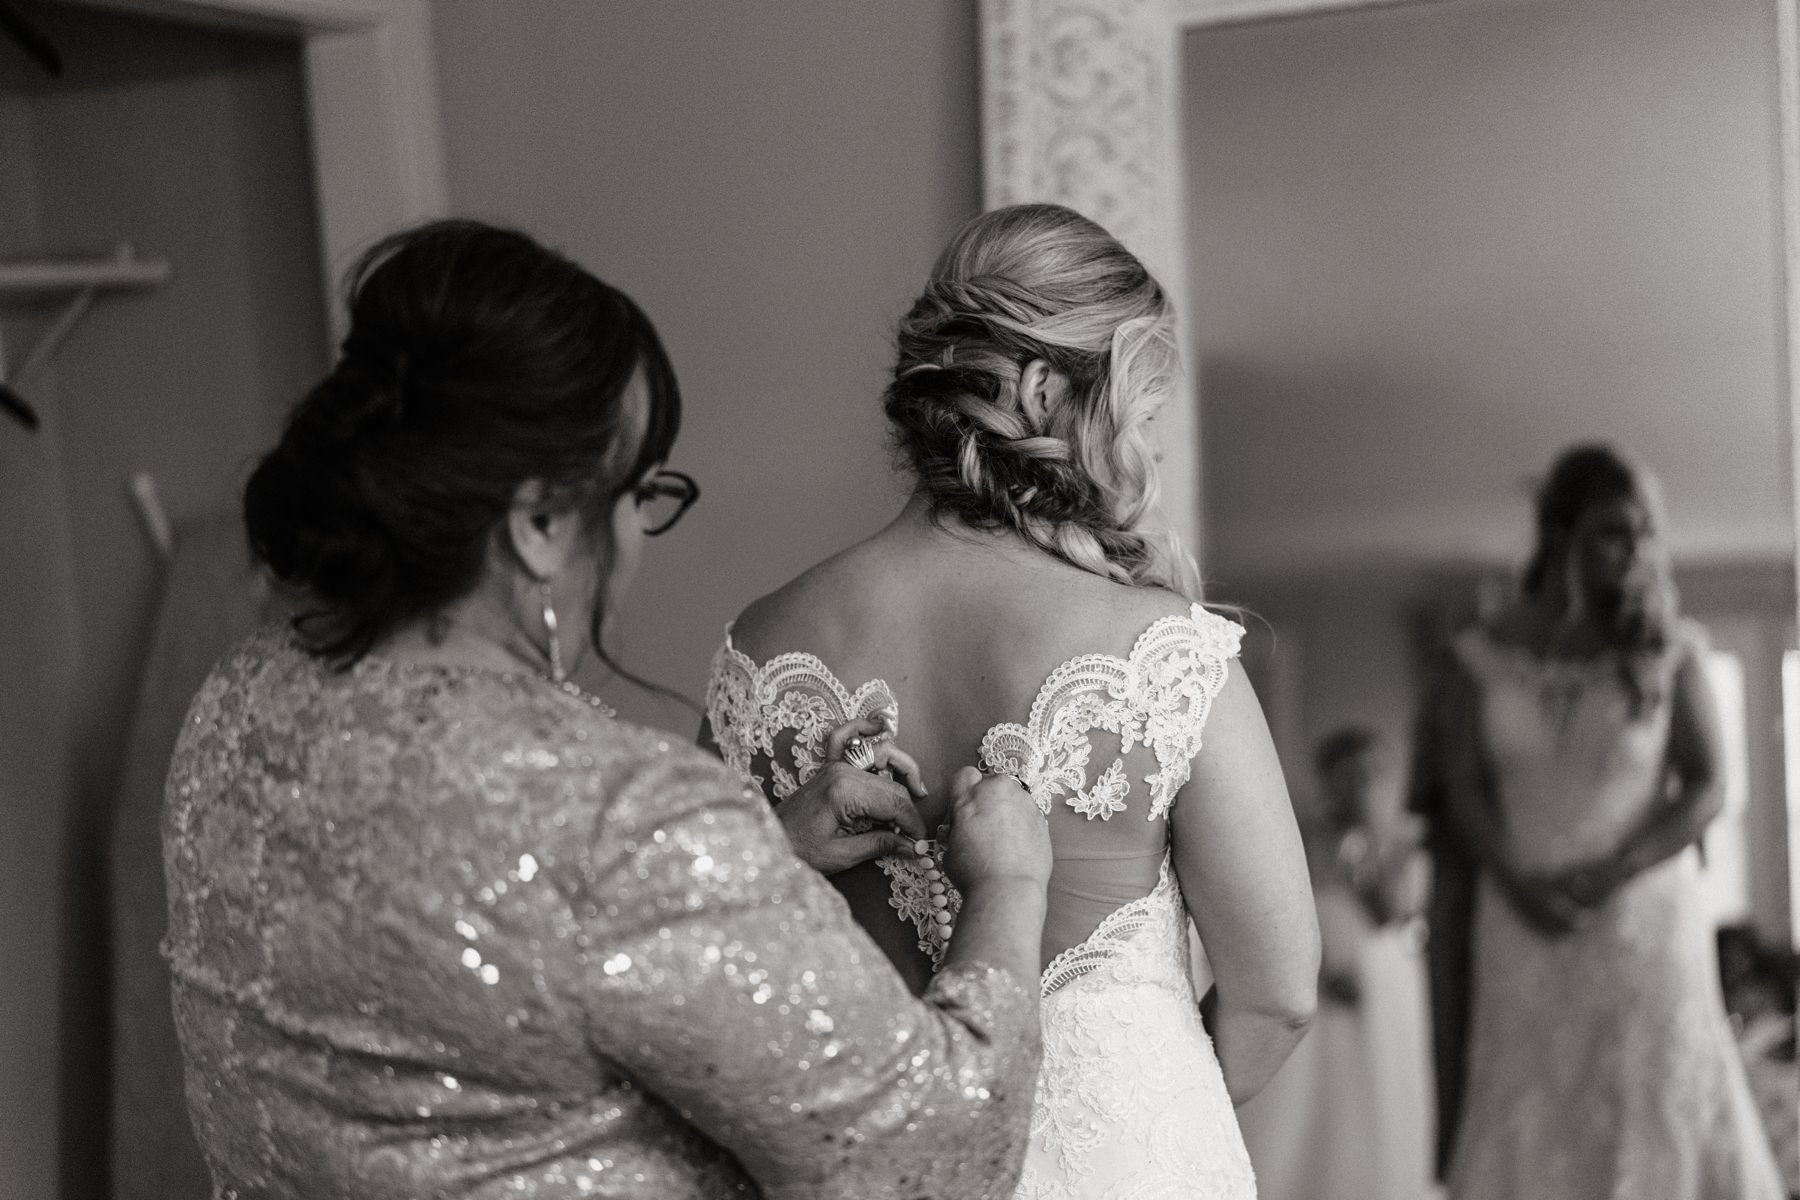 A bride getting ready at The Barn at Belamour in Springfield, MO.